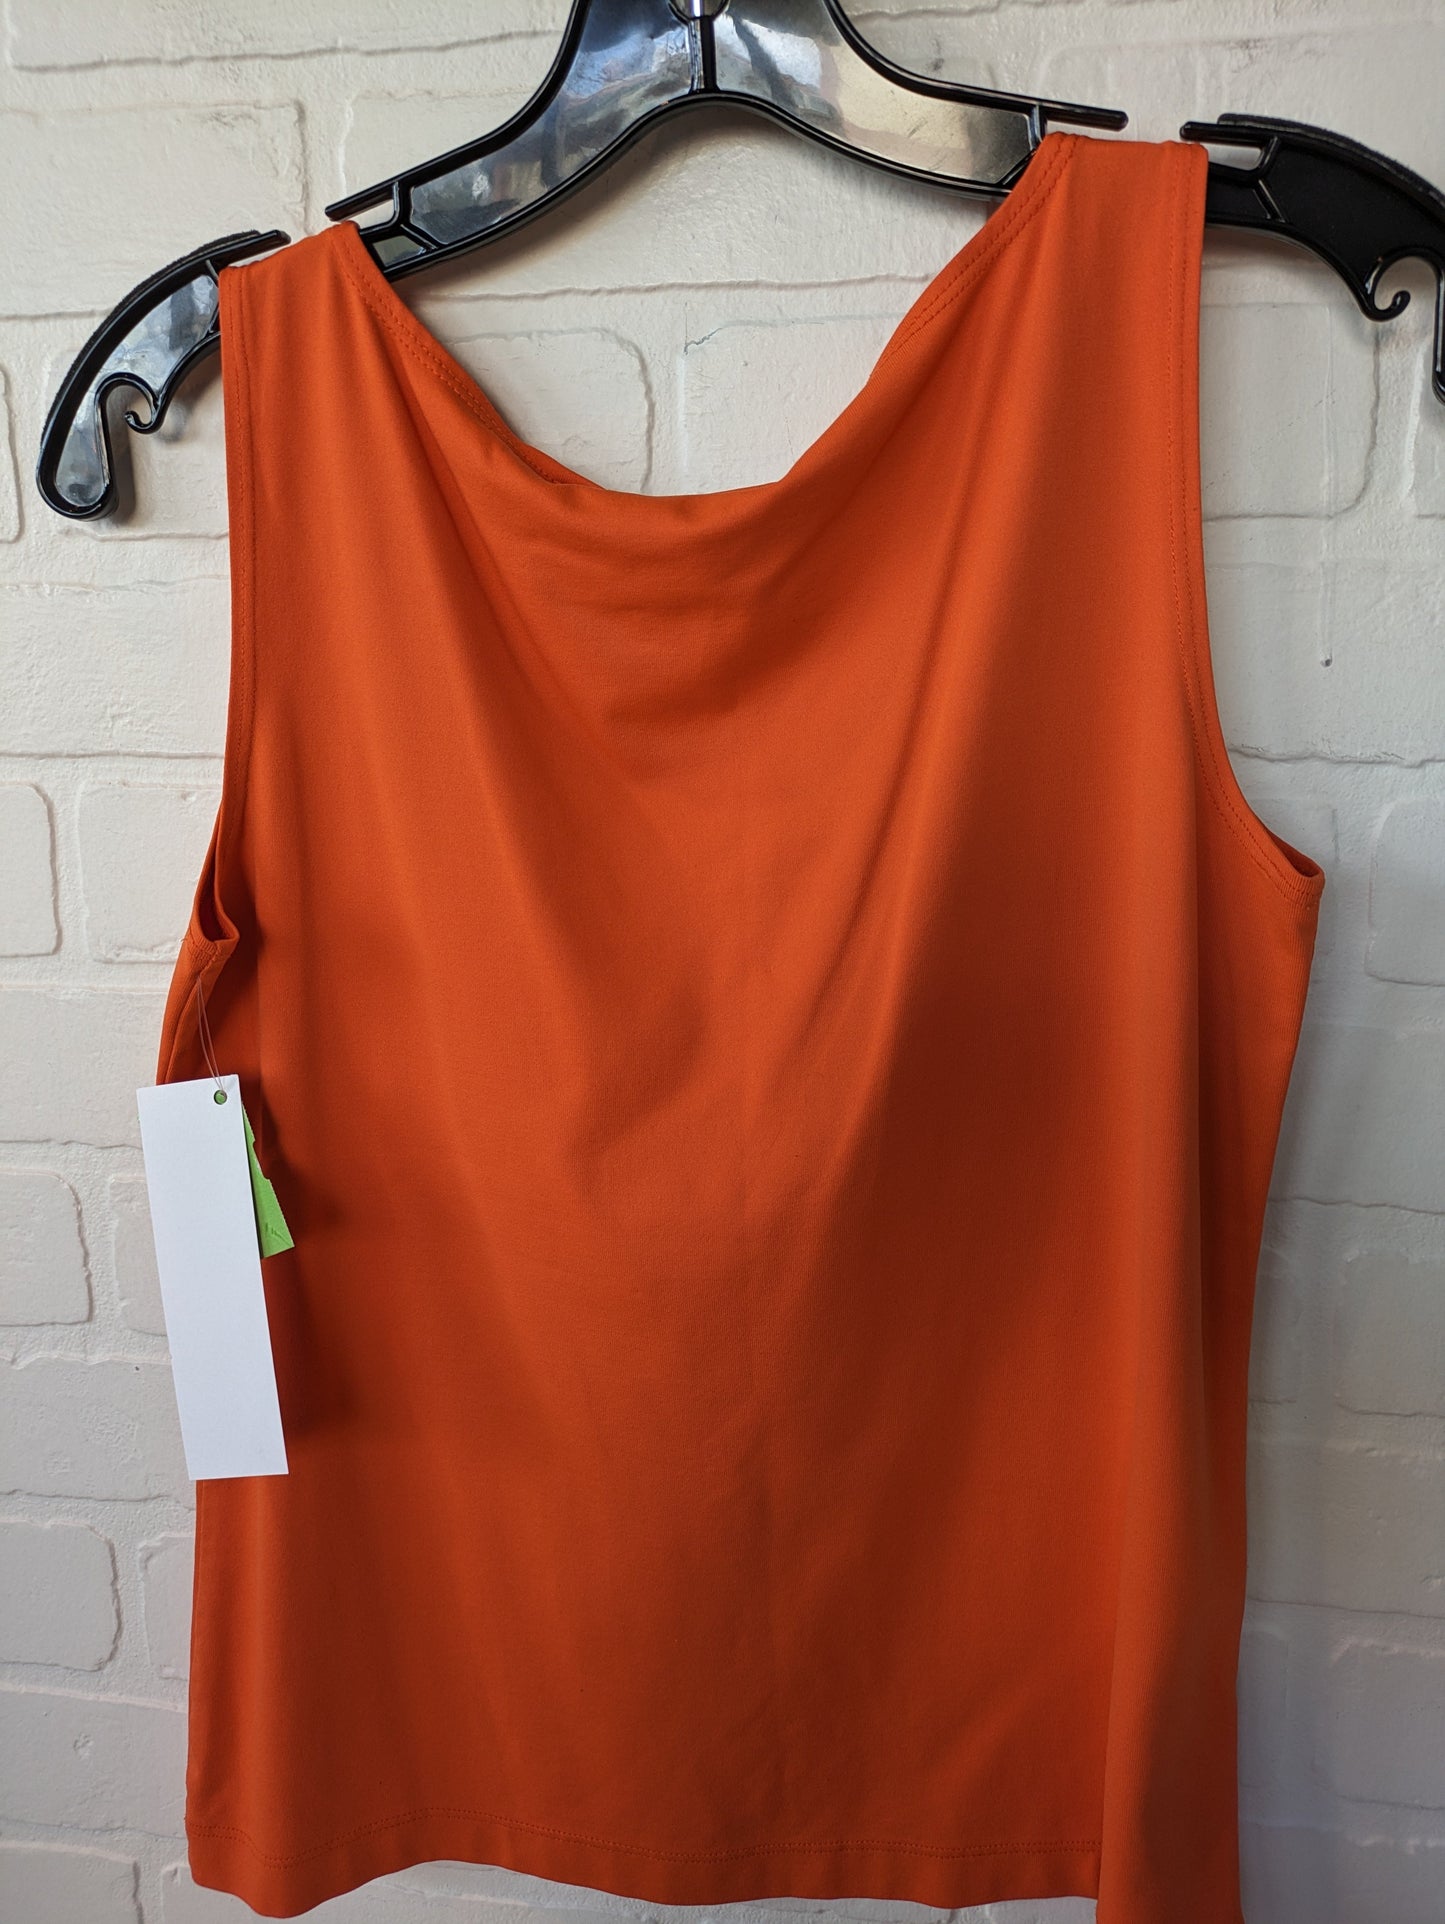 Top Sleeveless Basic By Chicos  Size: S